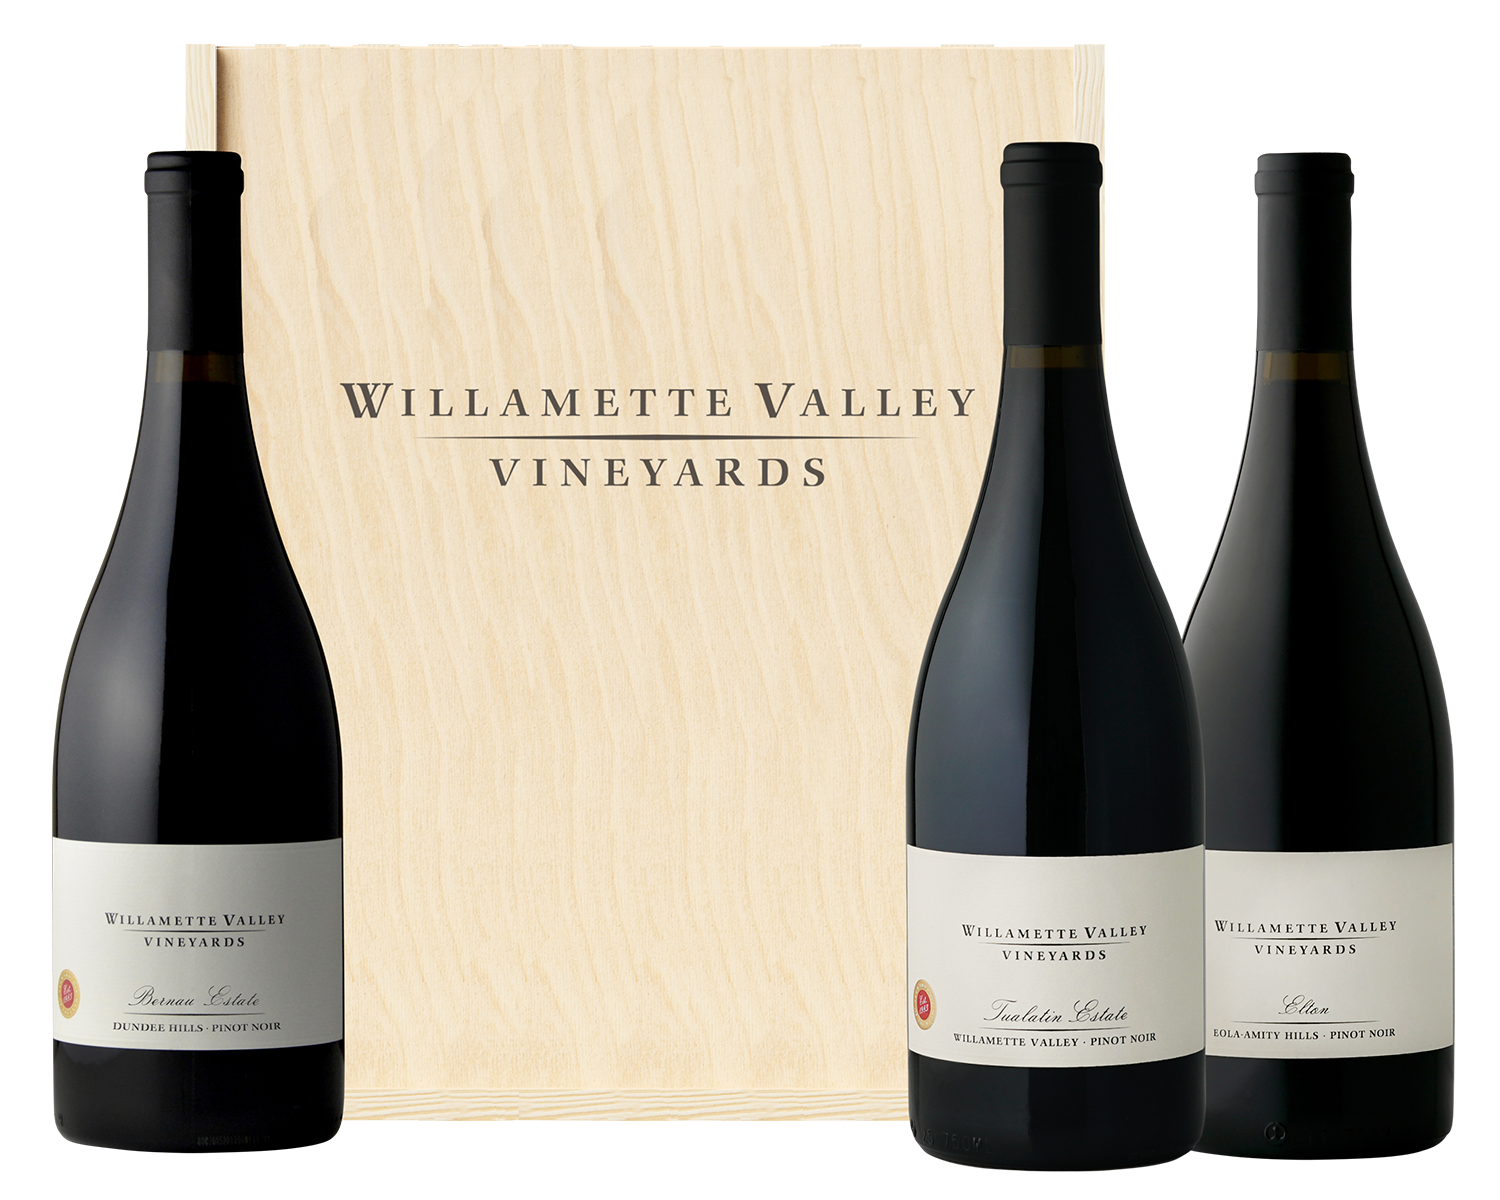 Three Willamette Valley Vineyards wine bottles inside a wooden box surrounded by holly